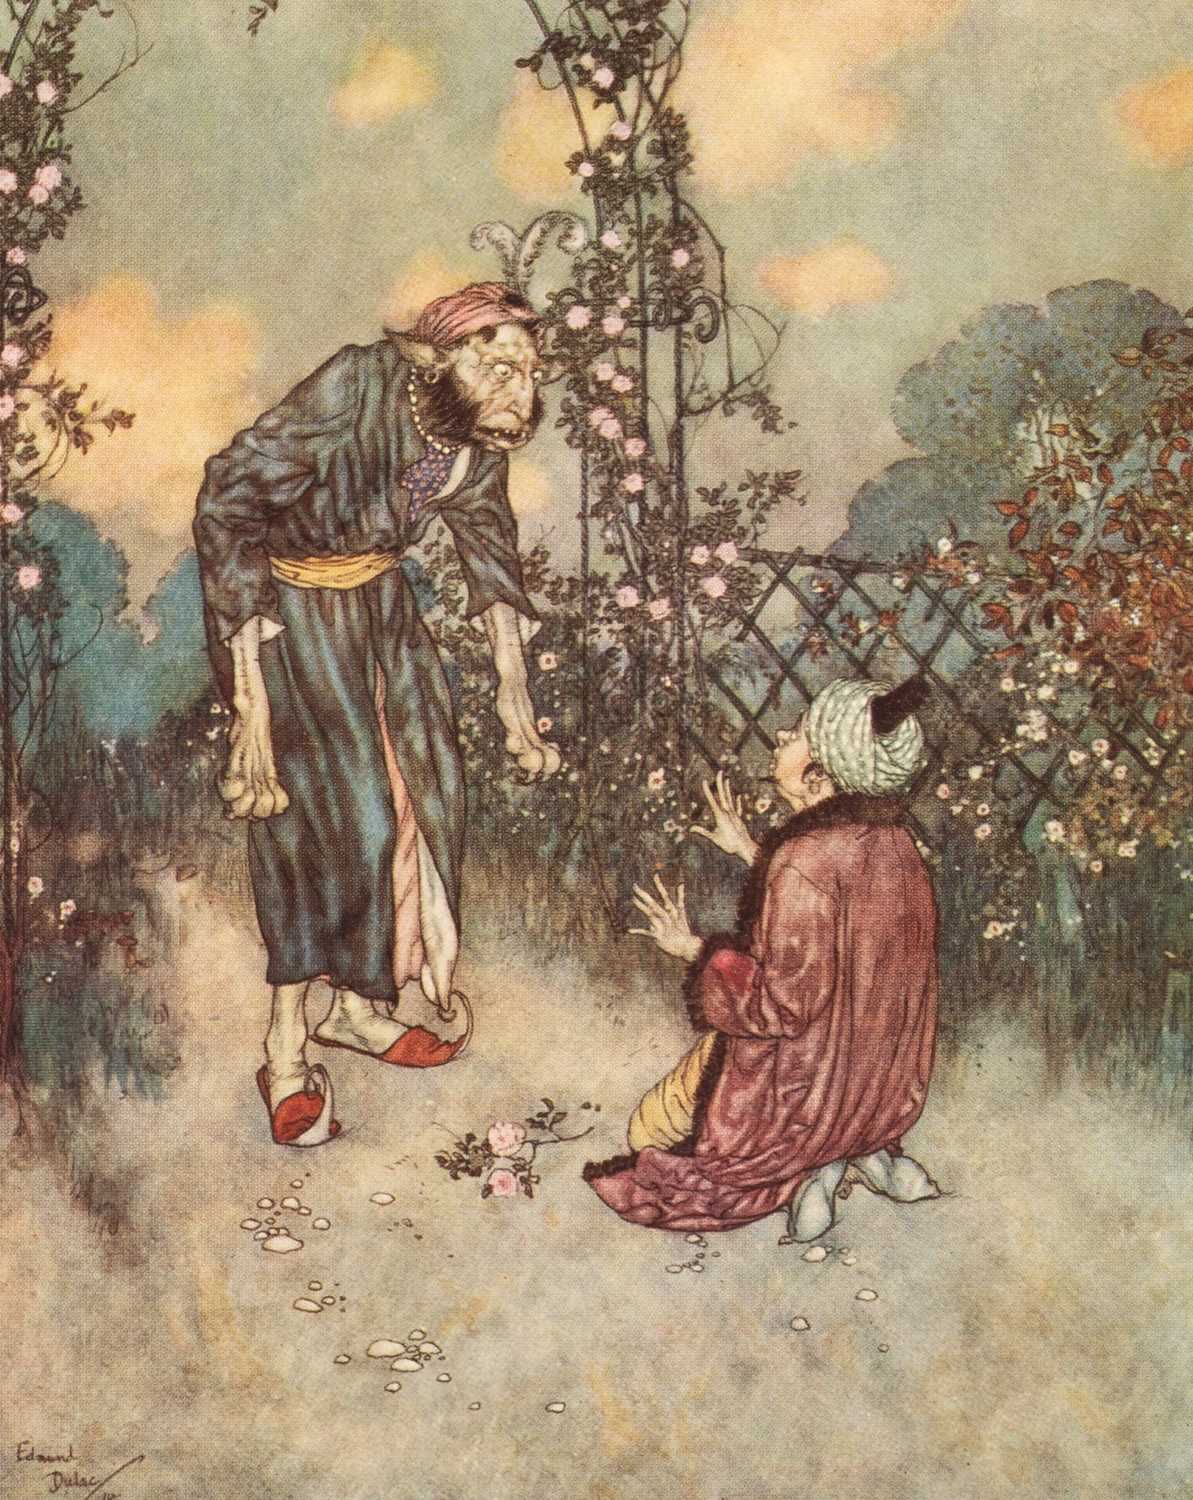 Quiller-Couch (Sir Arthur) The Sleeping Beauty and other fairy tales - Image 29 of 37